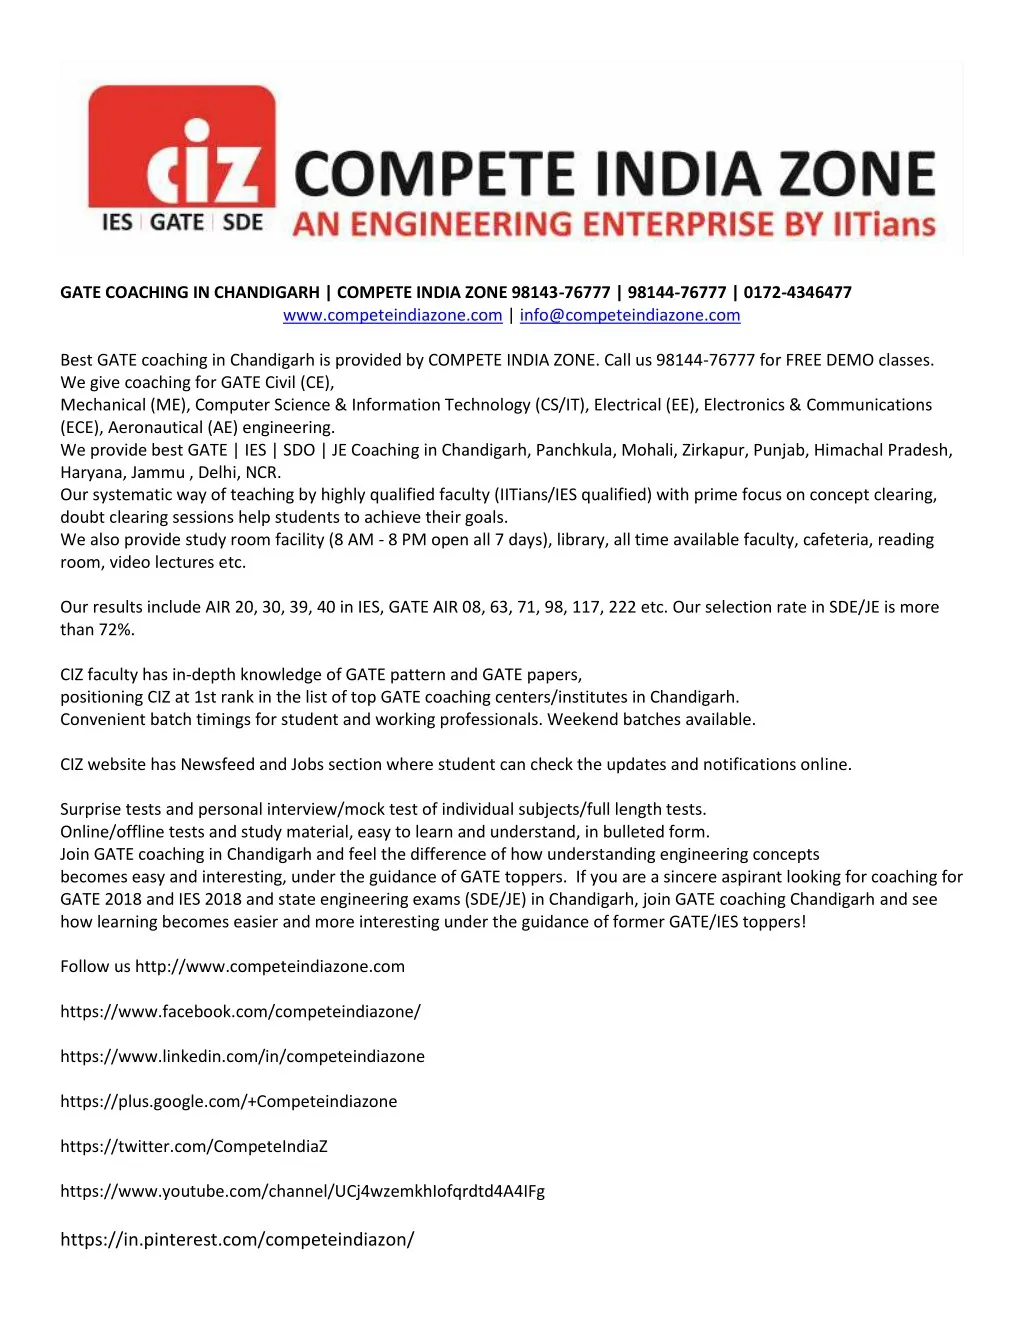 gate coaching in chandigarh compete india zone